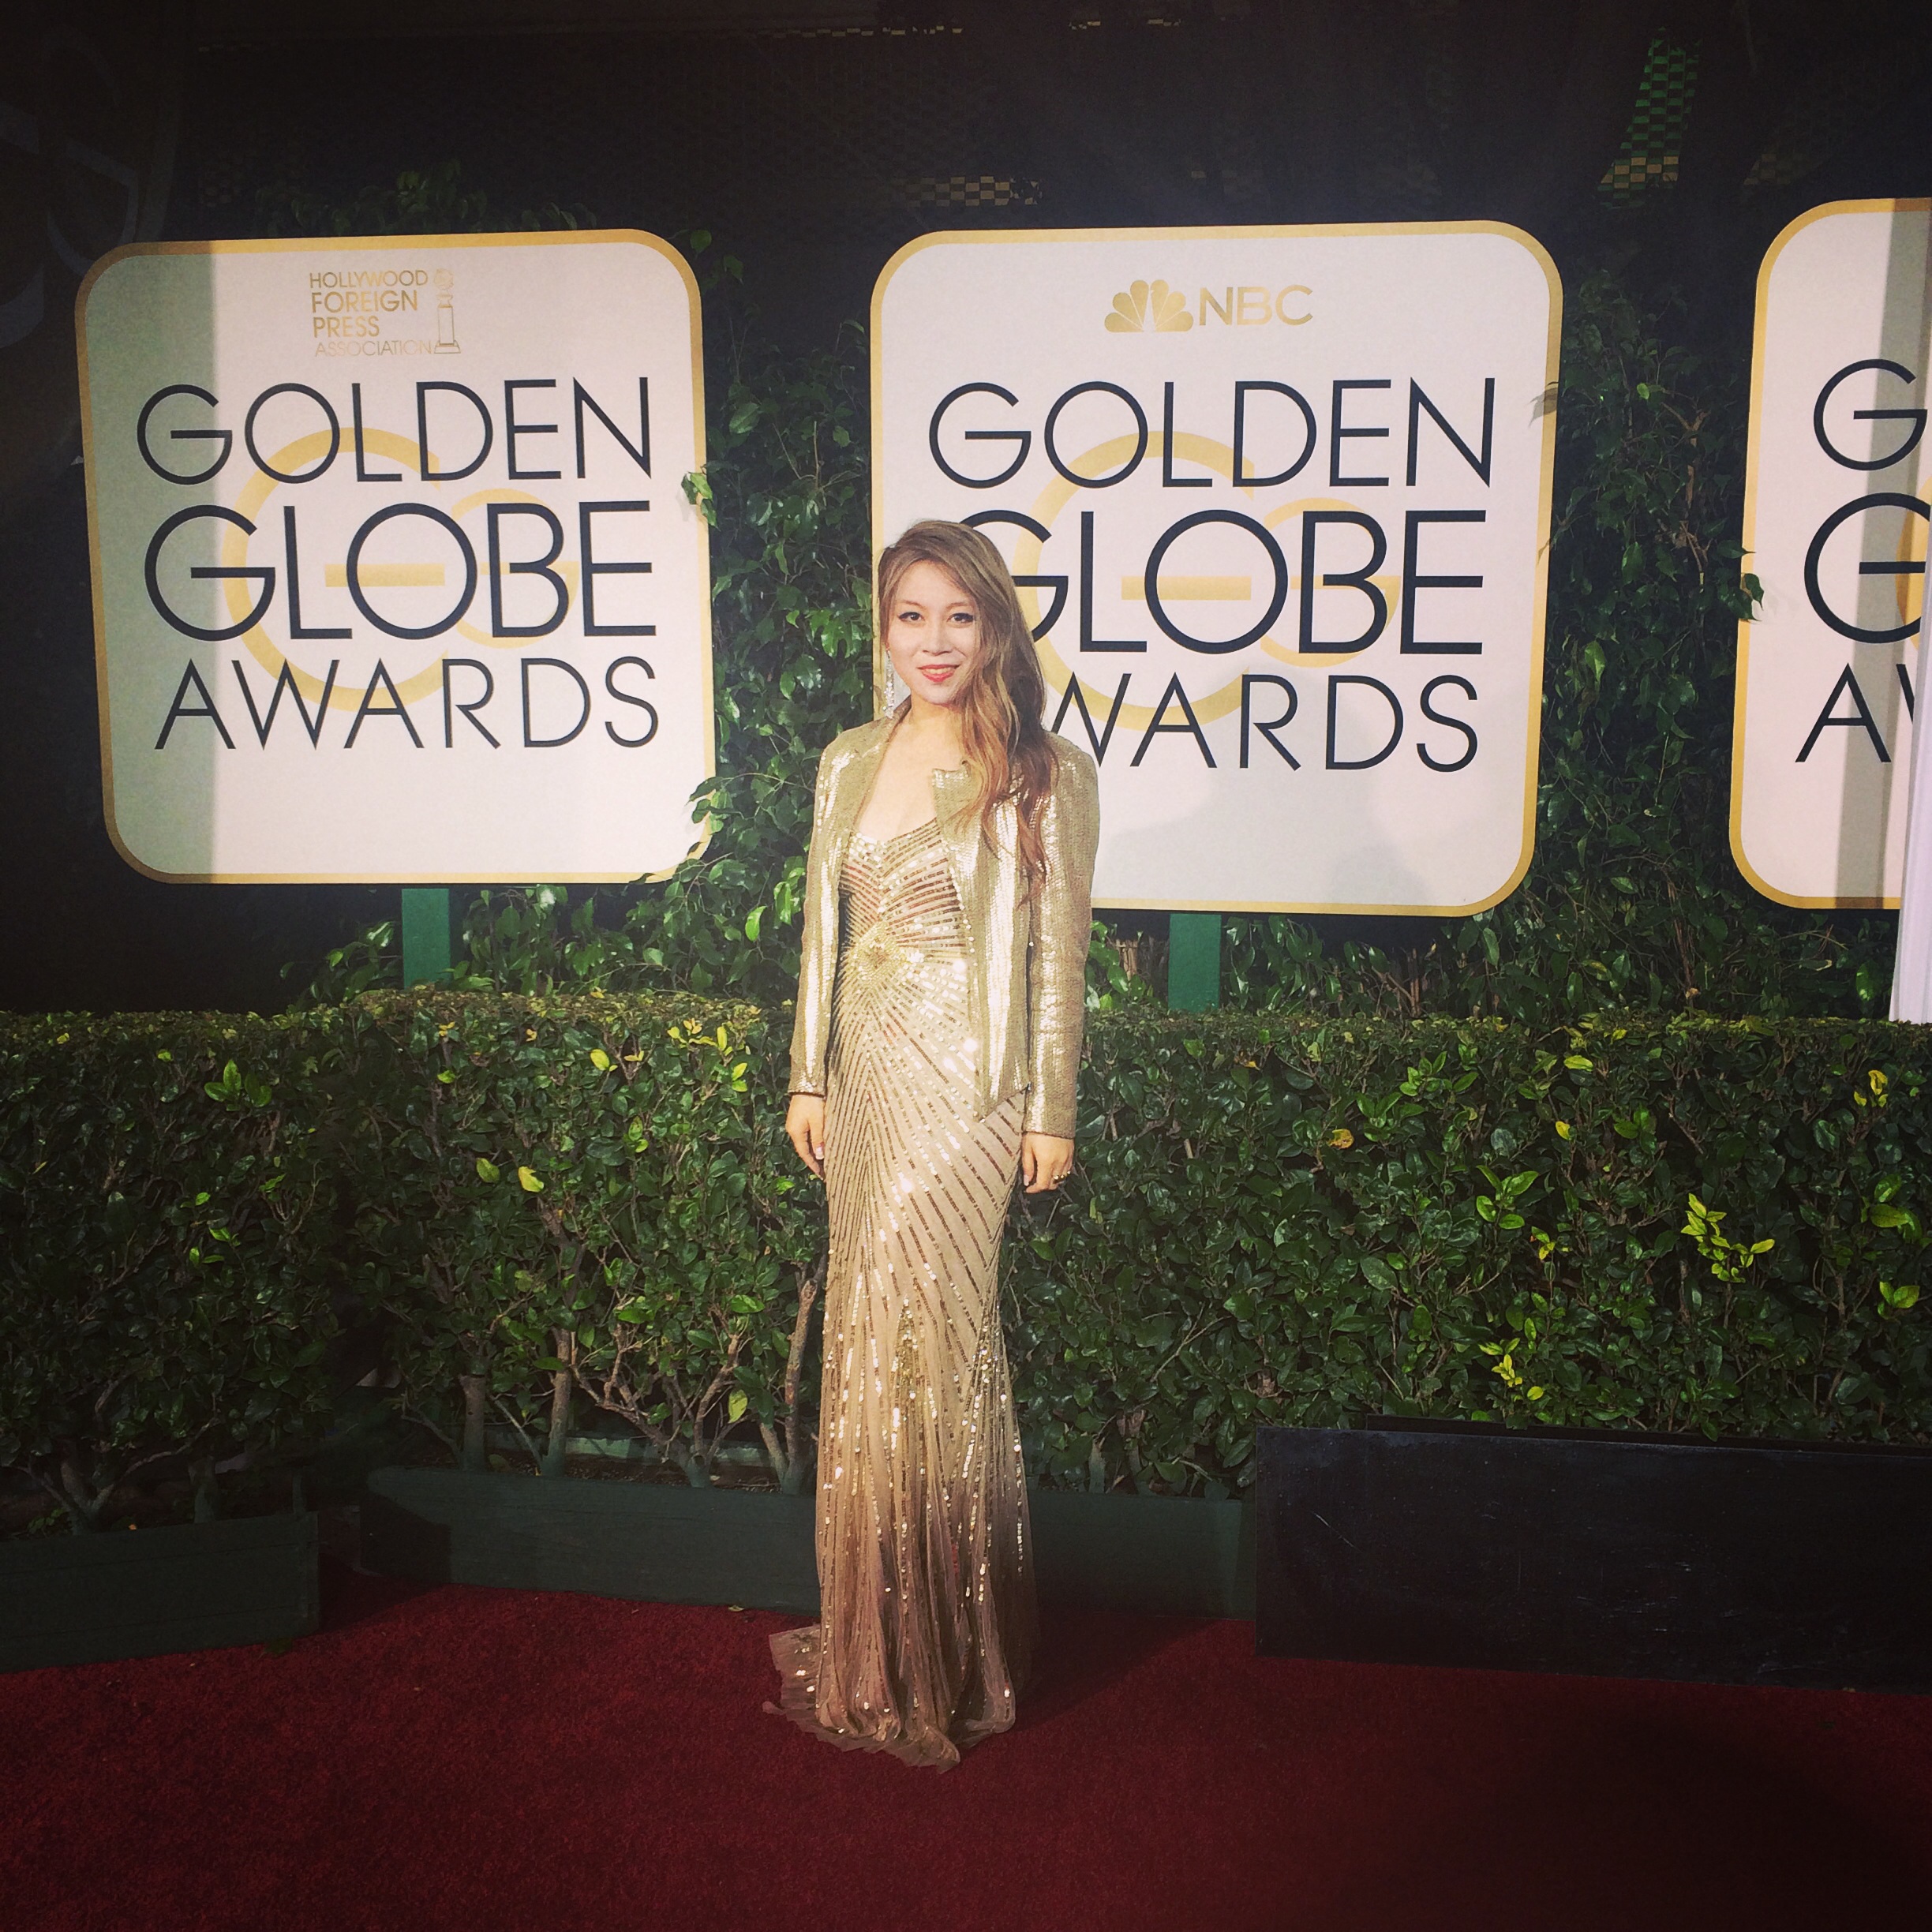 Alice Aoki arrive at the 72nd Annual Golden Globe Awards at the Beverly Hilton Hotel in Beverly Hills on January 11, 2015.